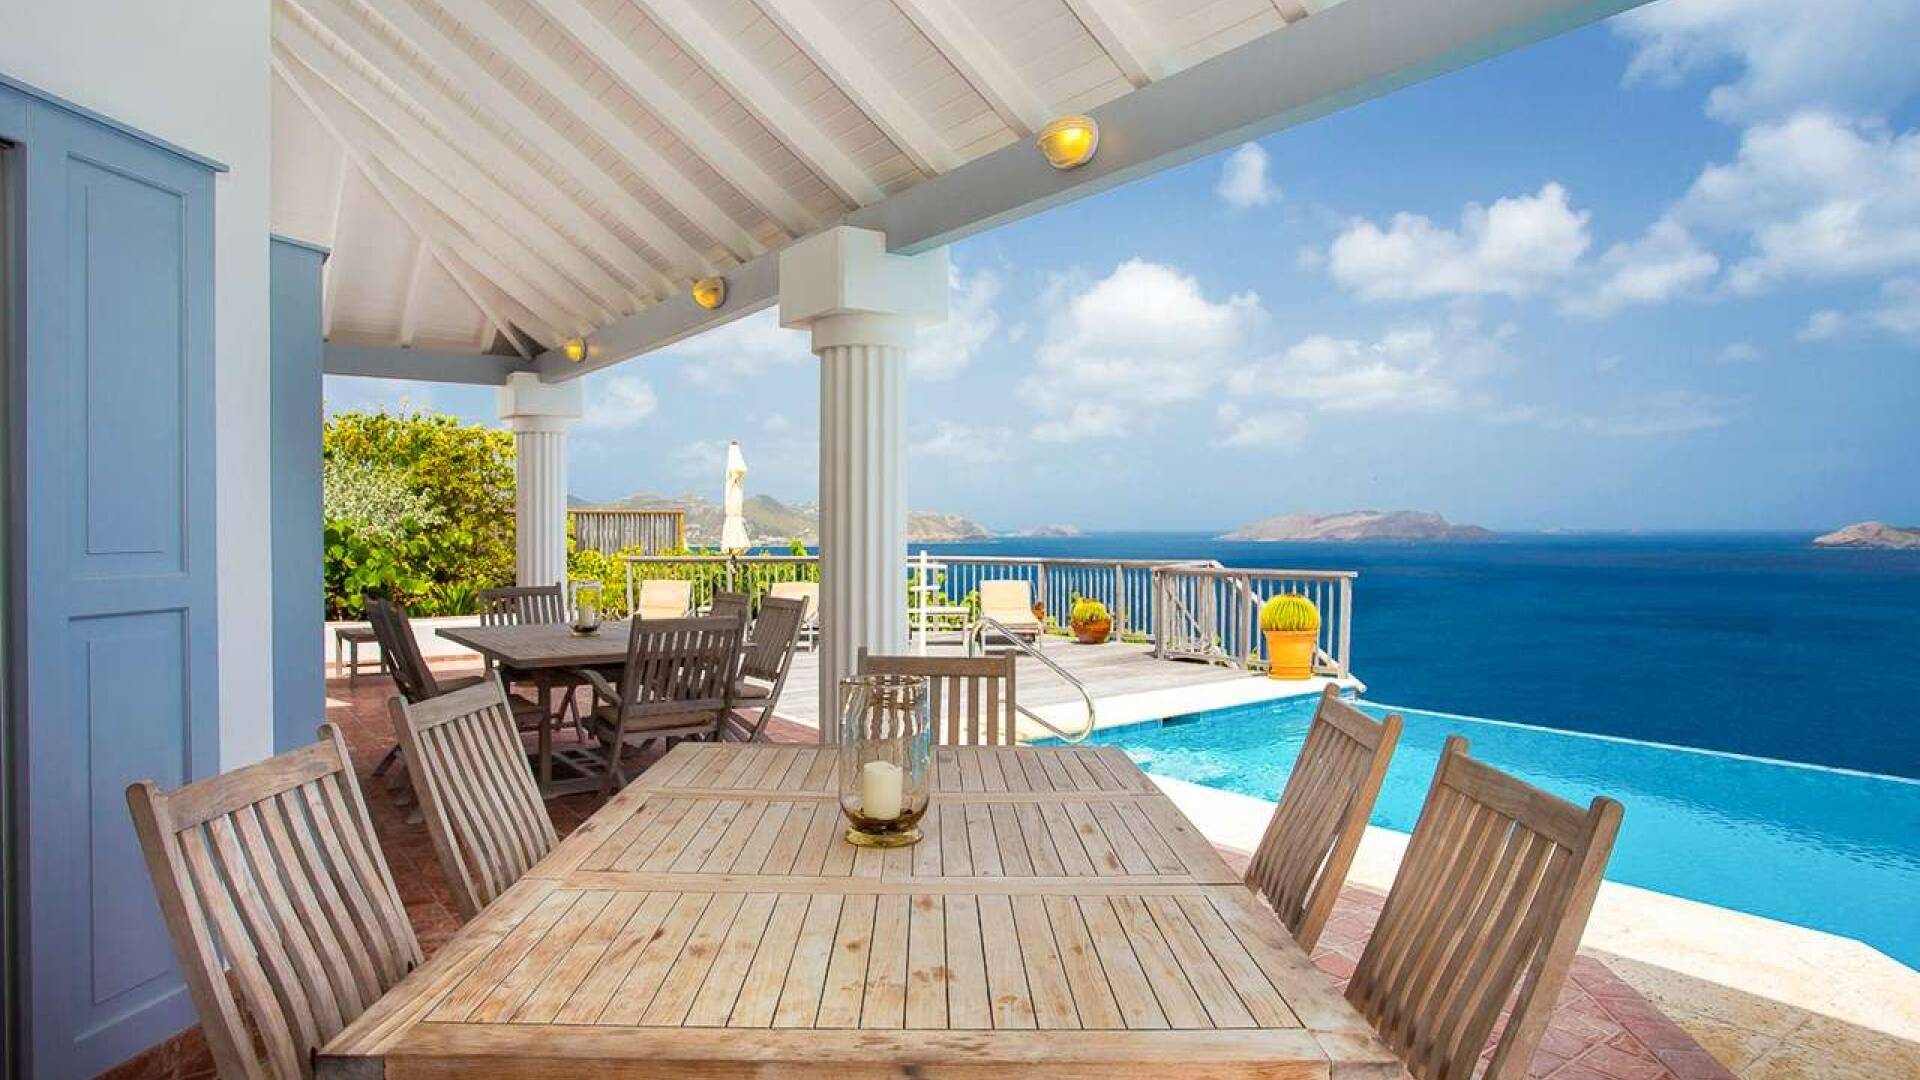 Terrace at WV FRE, Pointe Milou, St. Barthelemy